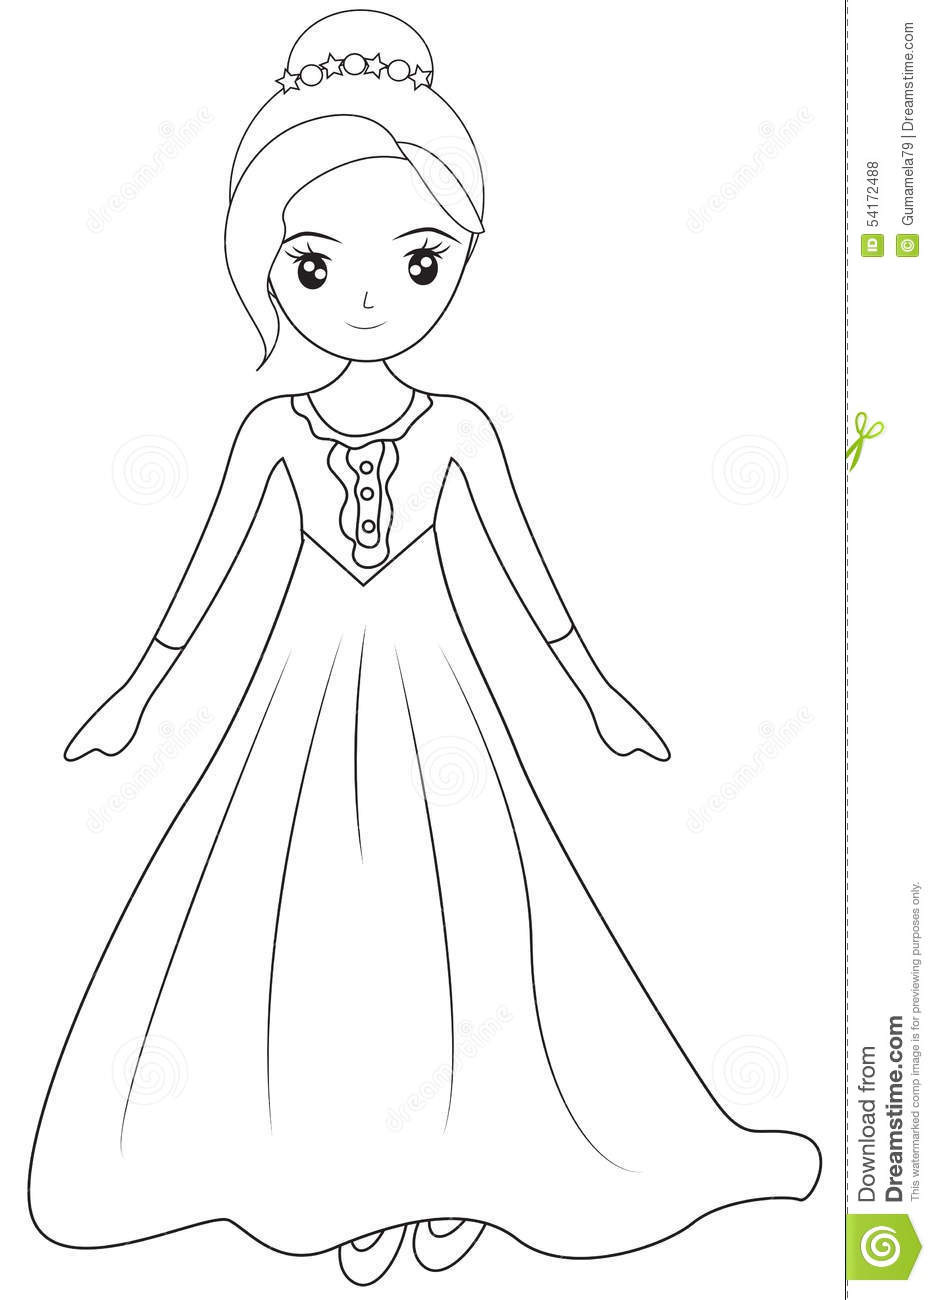 Coloring Pages For Girls Dresses
 Girl In A Long Sleeve Gown Coloring Page Stock